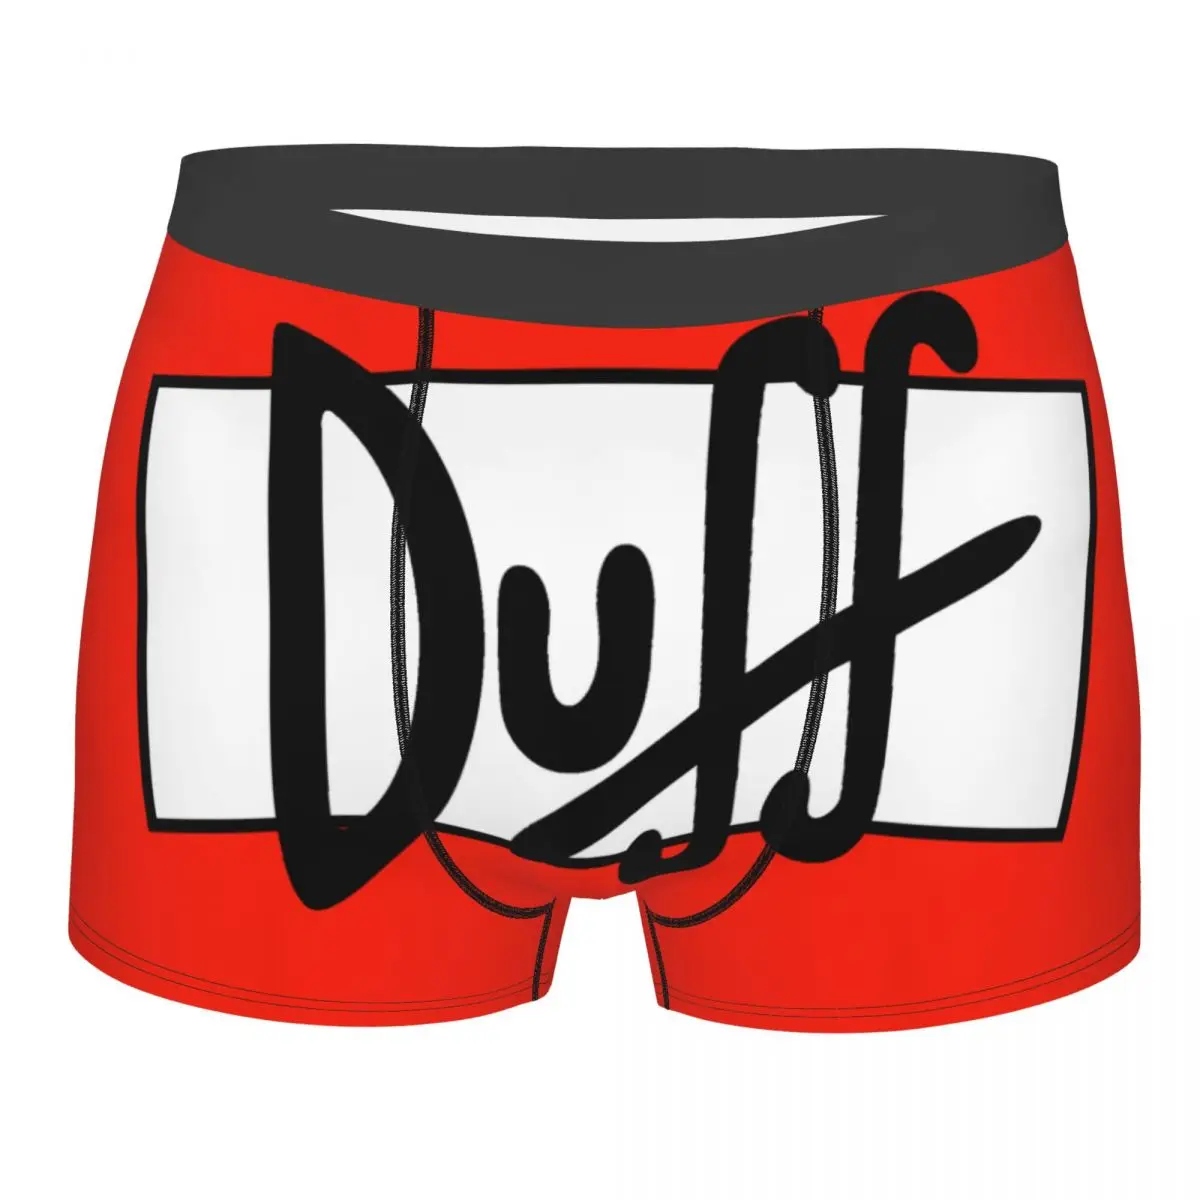 

Novelty Duff Beer Boxers Shorts Panties Male Underpants Stretch Briefs Underwear